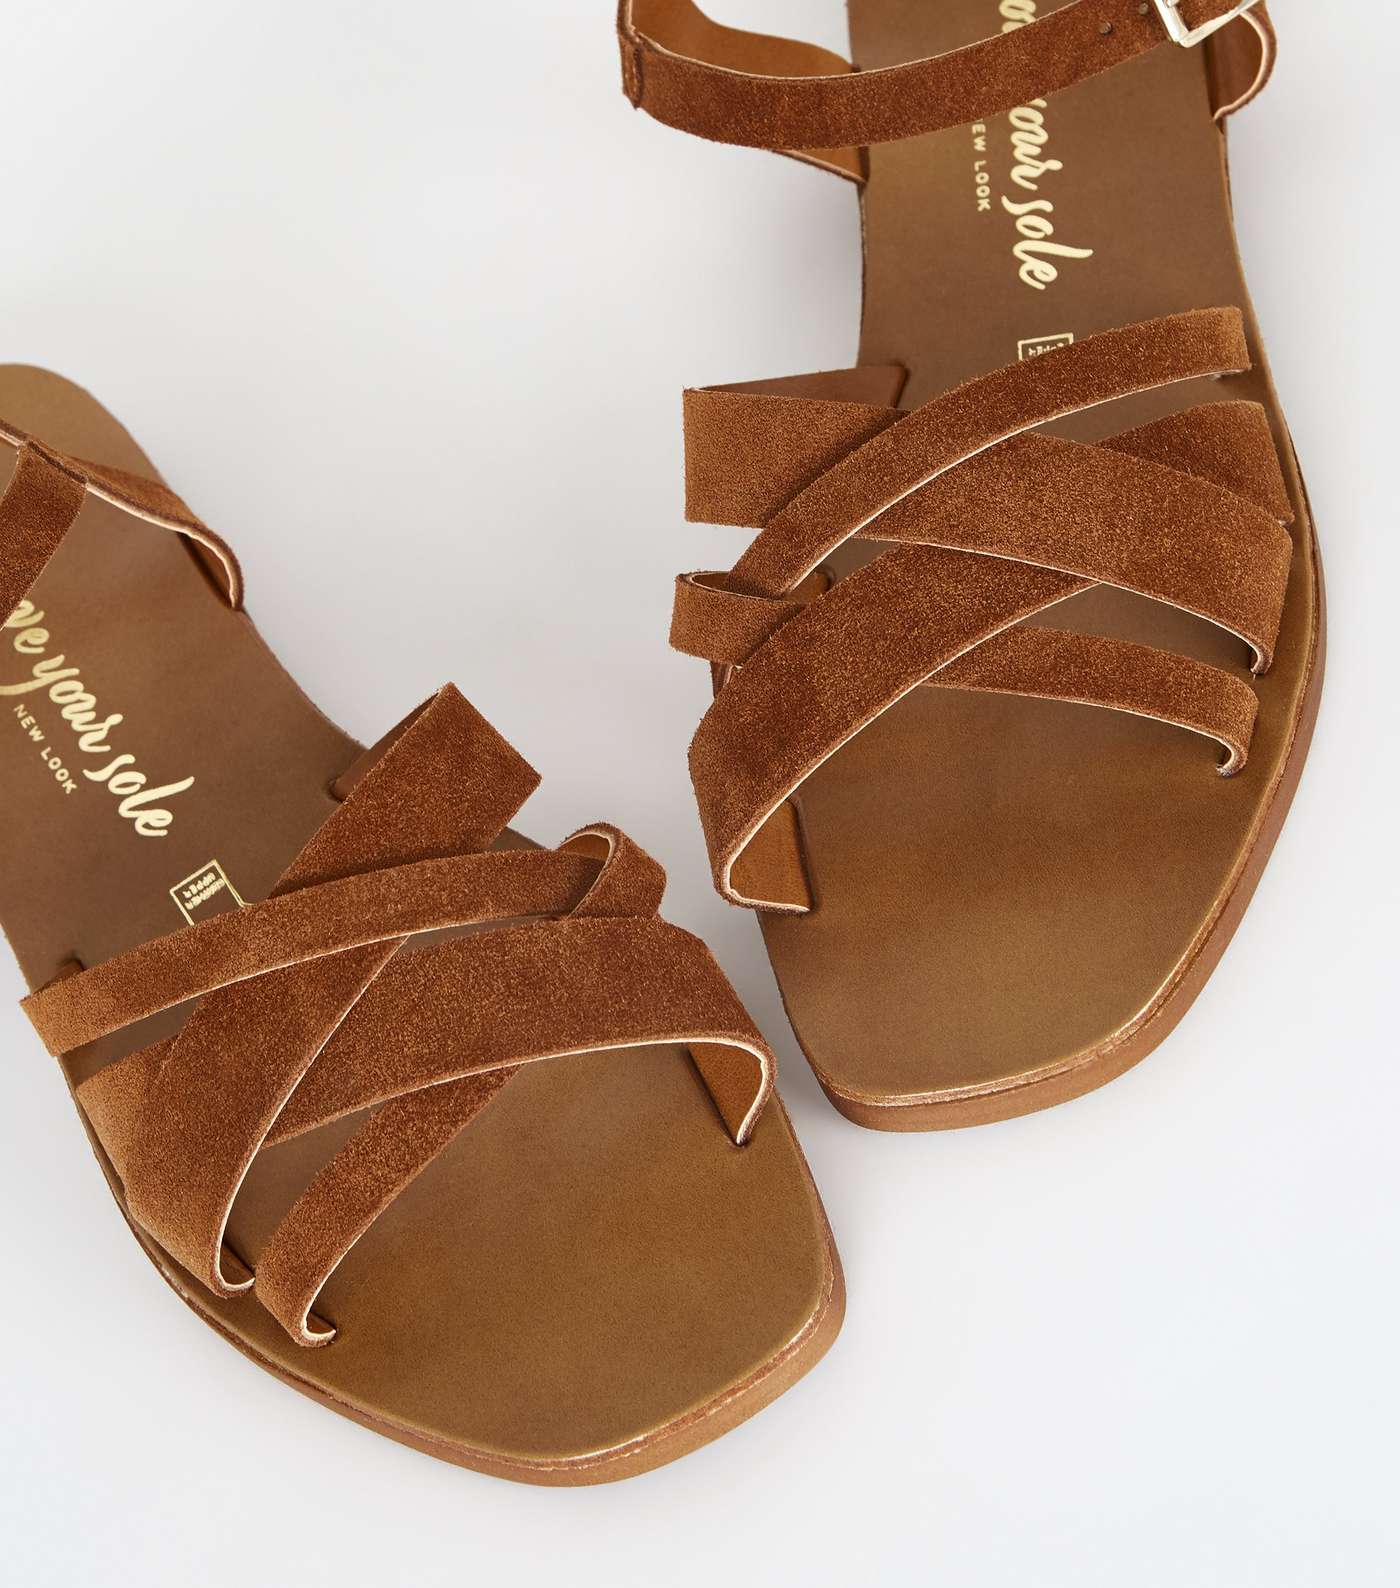 Wide Fit Tan Suede Strappy Flat Sandals Image 4